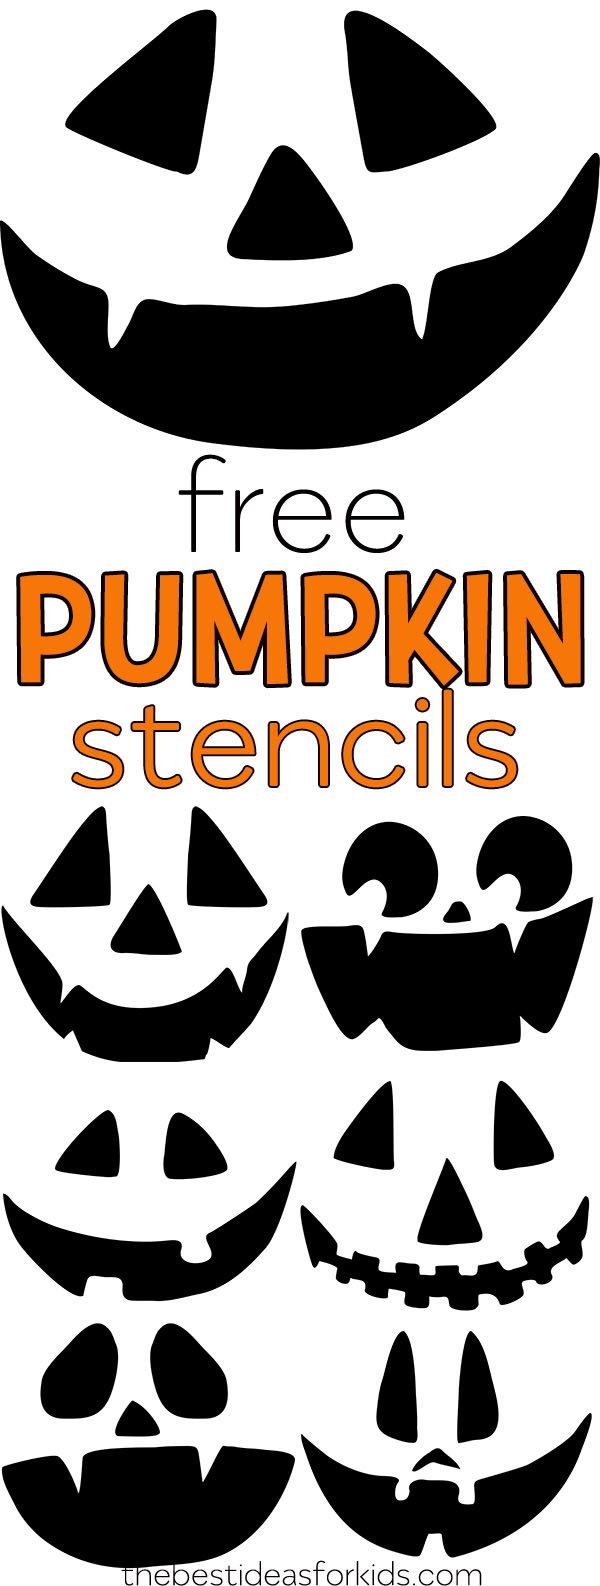 download-293-free-pumpkin-carving-patterns-and-templates-coloring